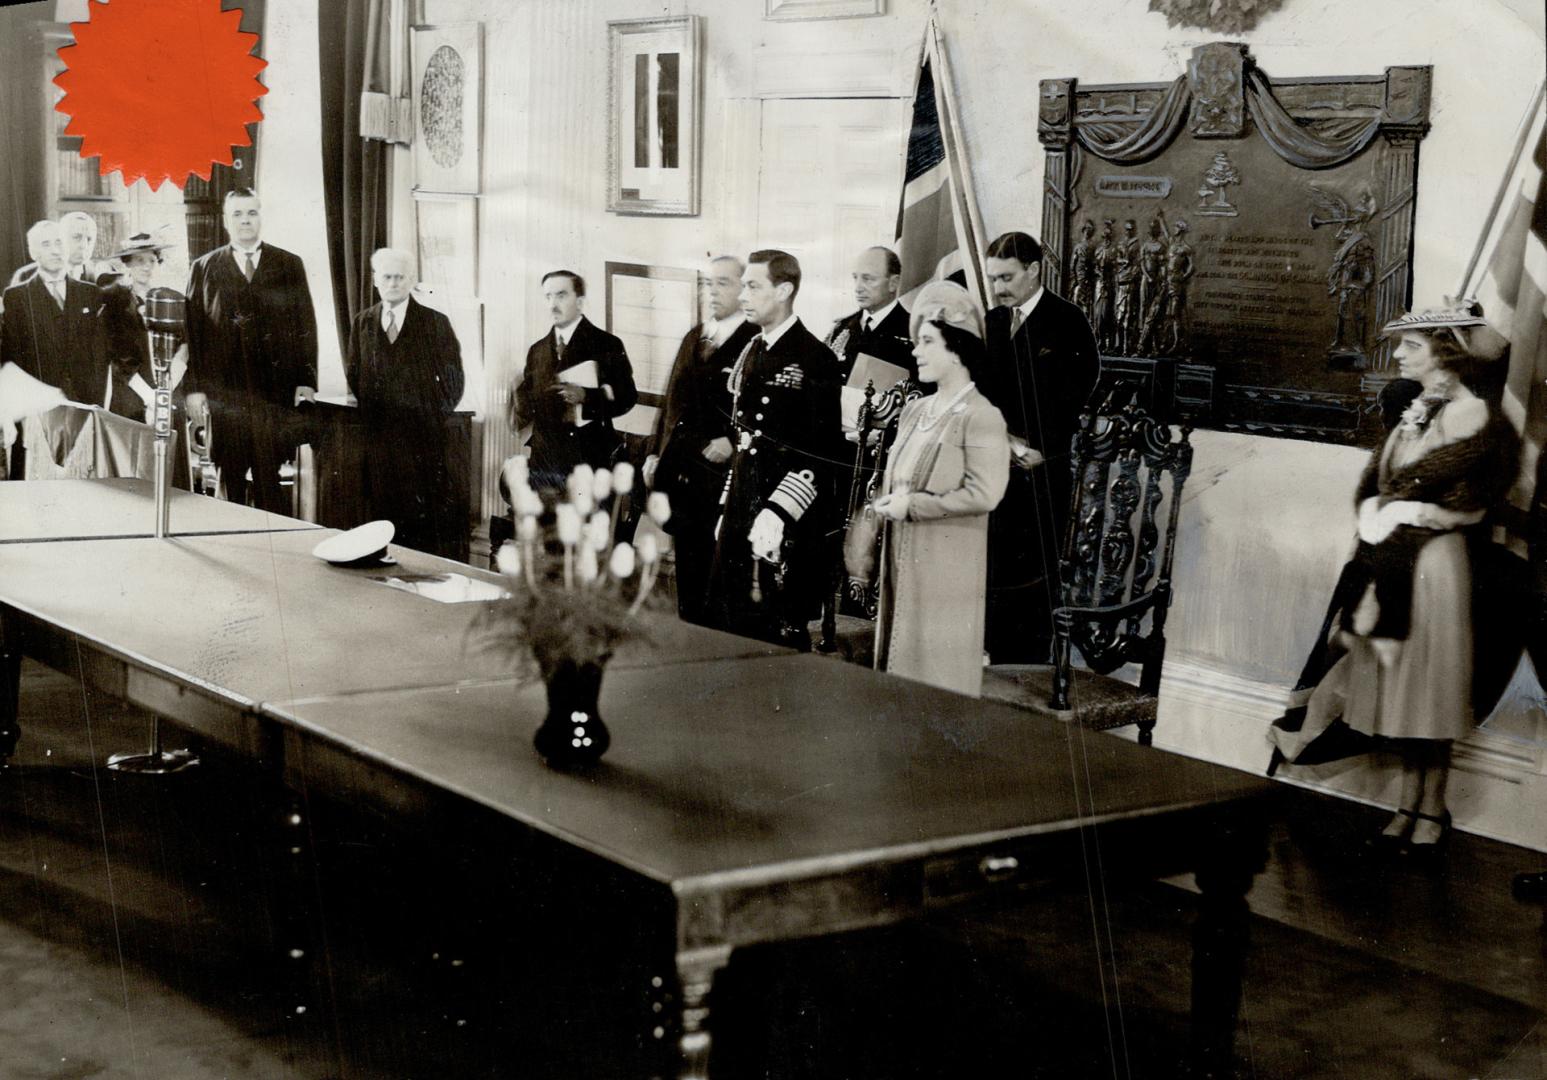 Right, the King and Queen hear Prince Edward Island's greeting in the famed confederation chamber in Charlottetown's provincial building. Behind them (...)